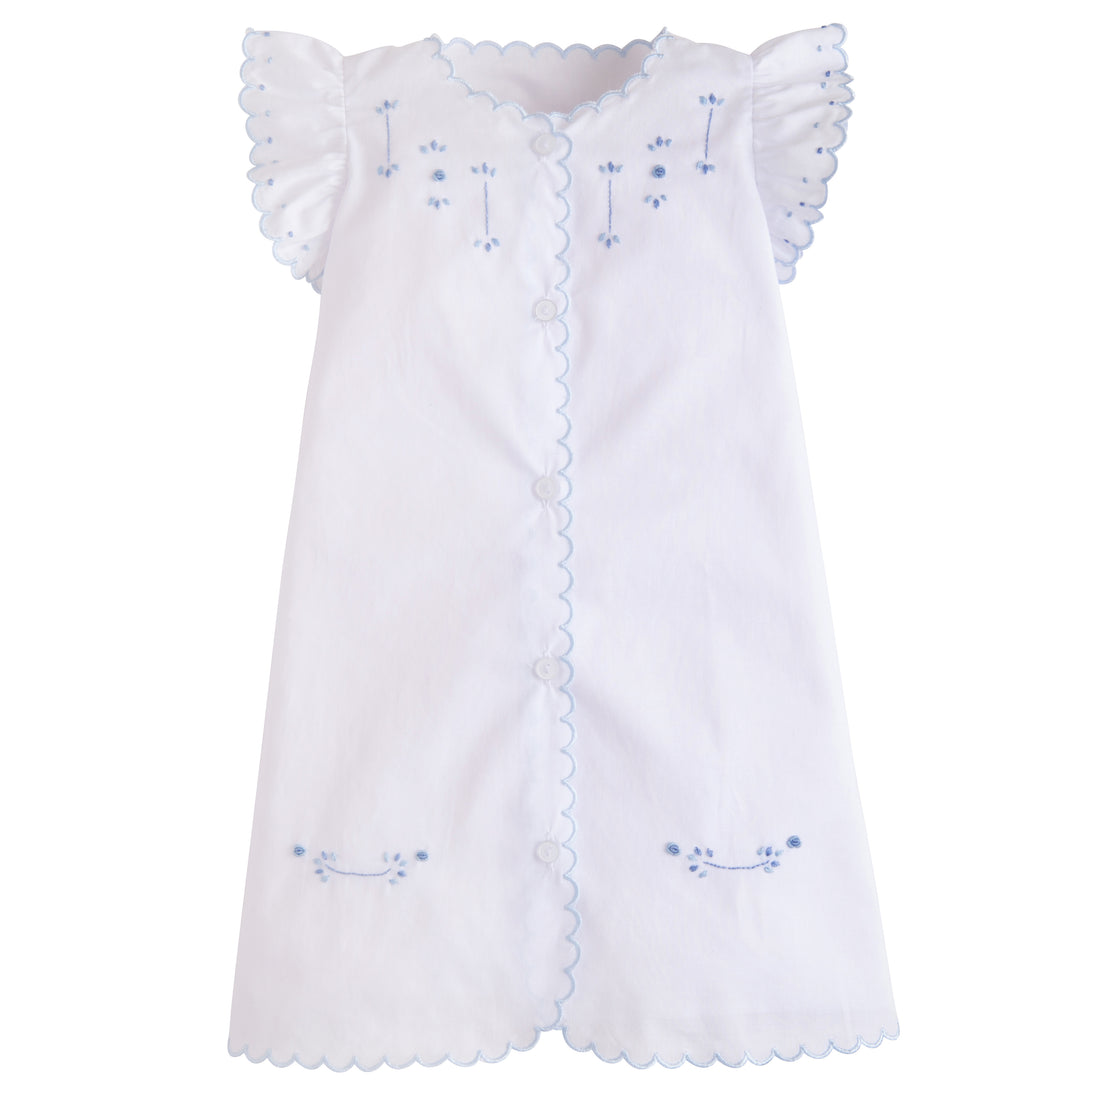 Little English embroidered newborn gown for girls, blue french knots with scallop trim, timeless receiving gown